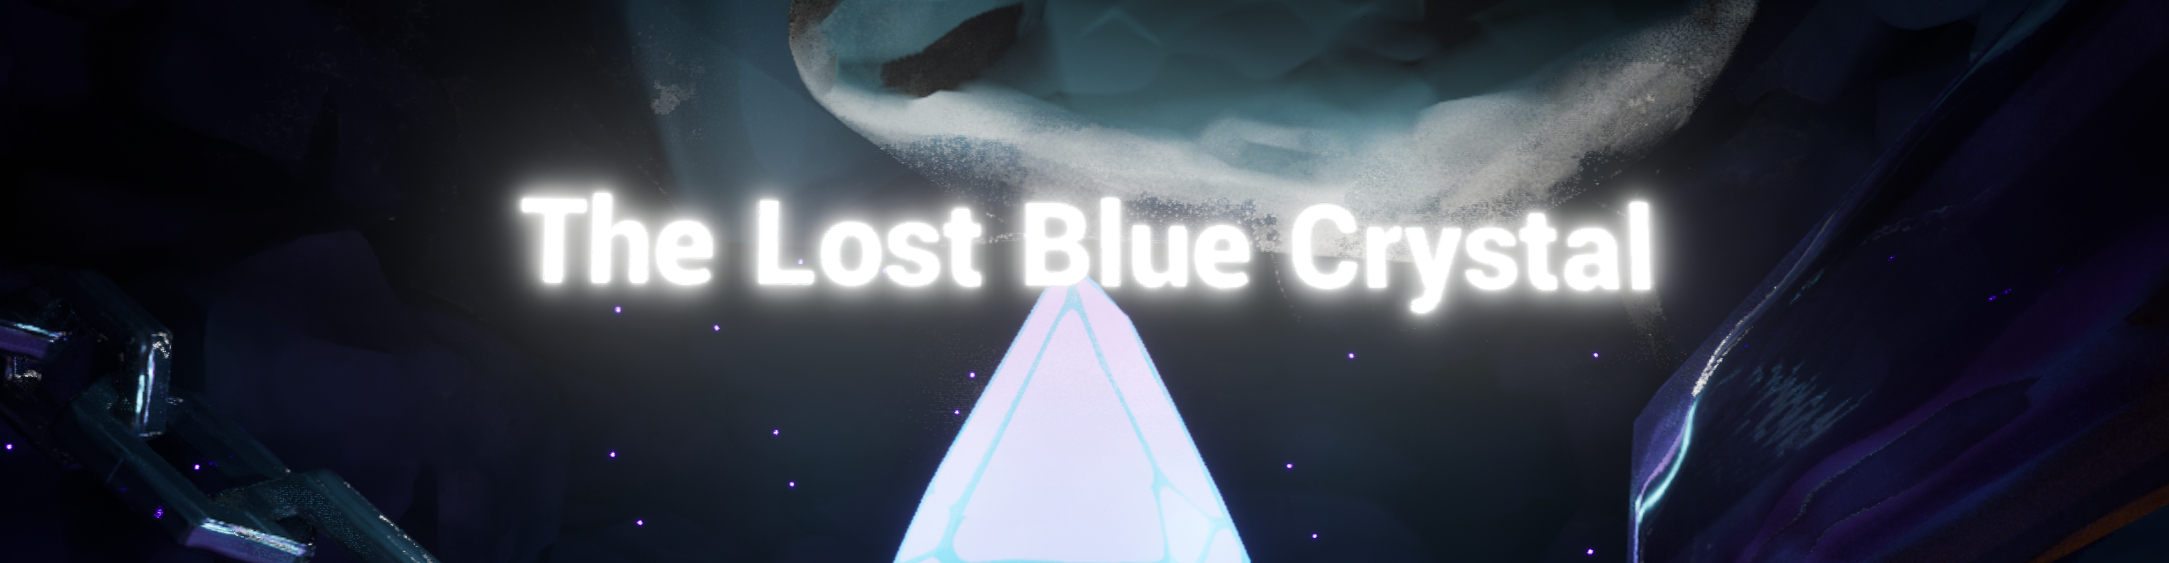 The Lost Blue Crystal